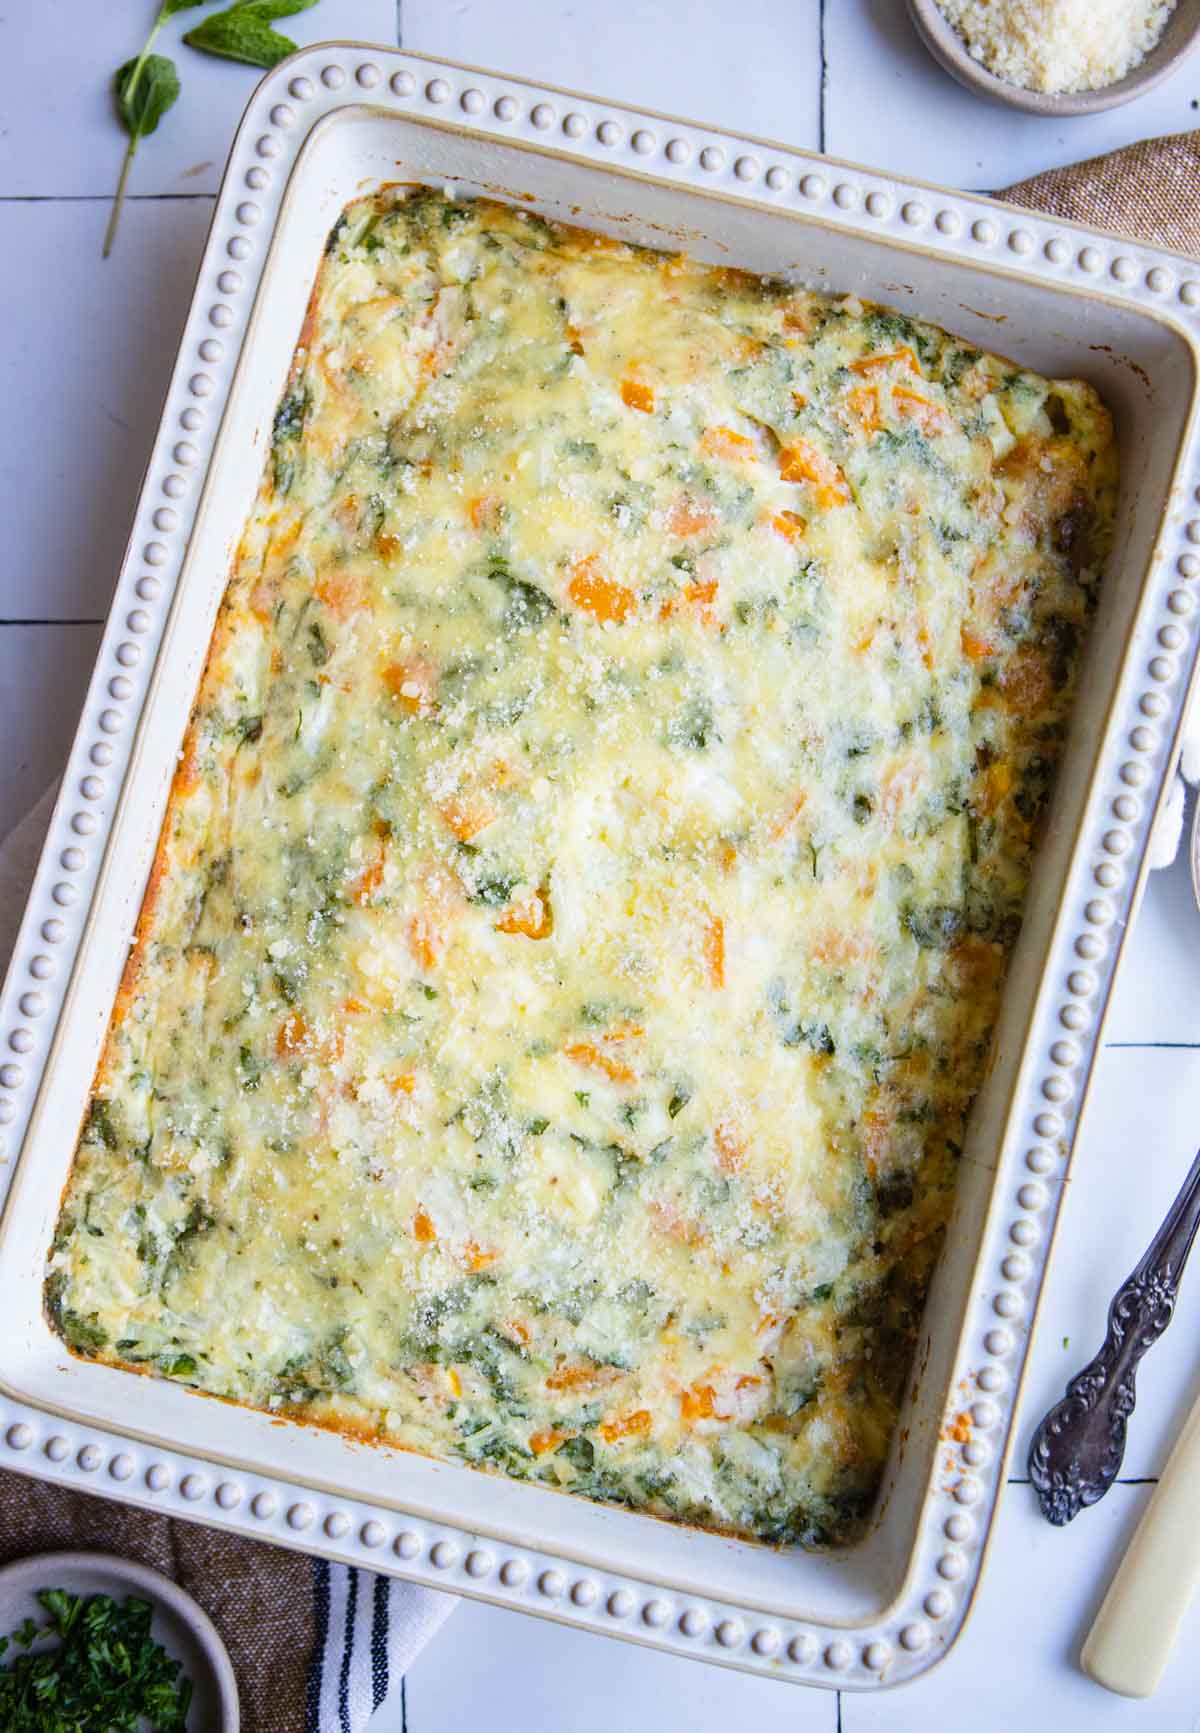 casserole dish filled with a baked cottage cheese egg dish 